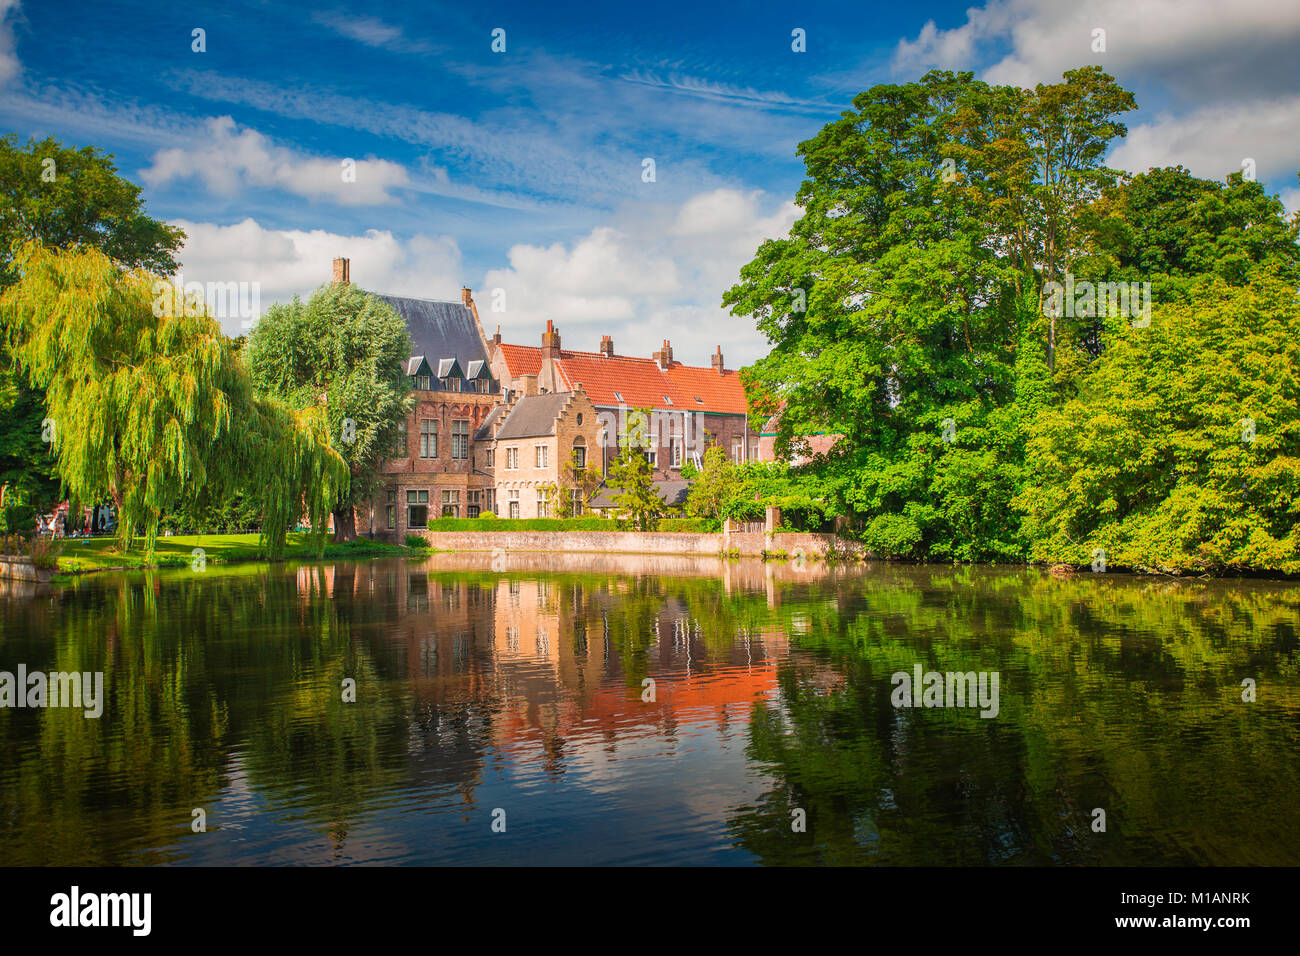 Brugge sunny cityscape. Old buildings of Bruges and green trees reflected in lake. Historical center of Europe. Stock Photo